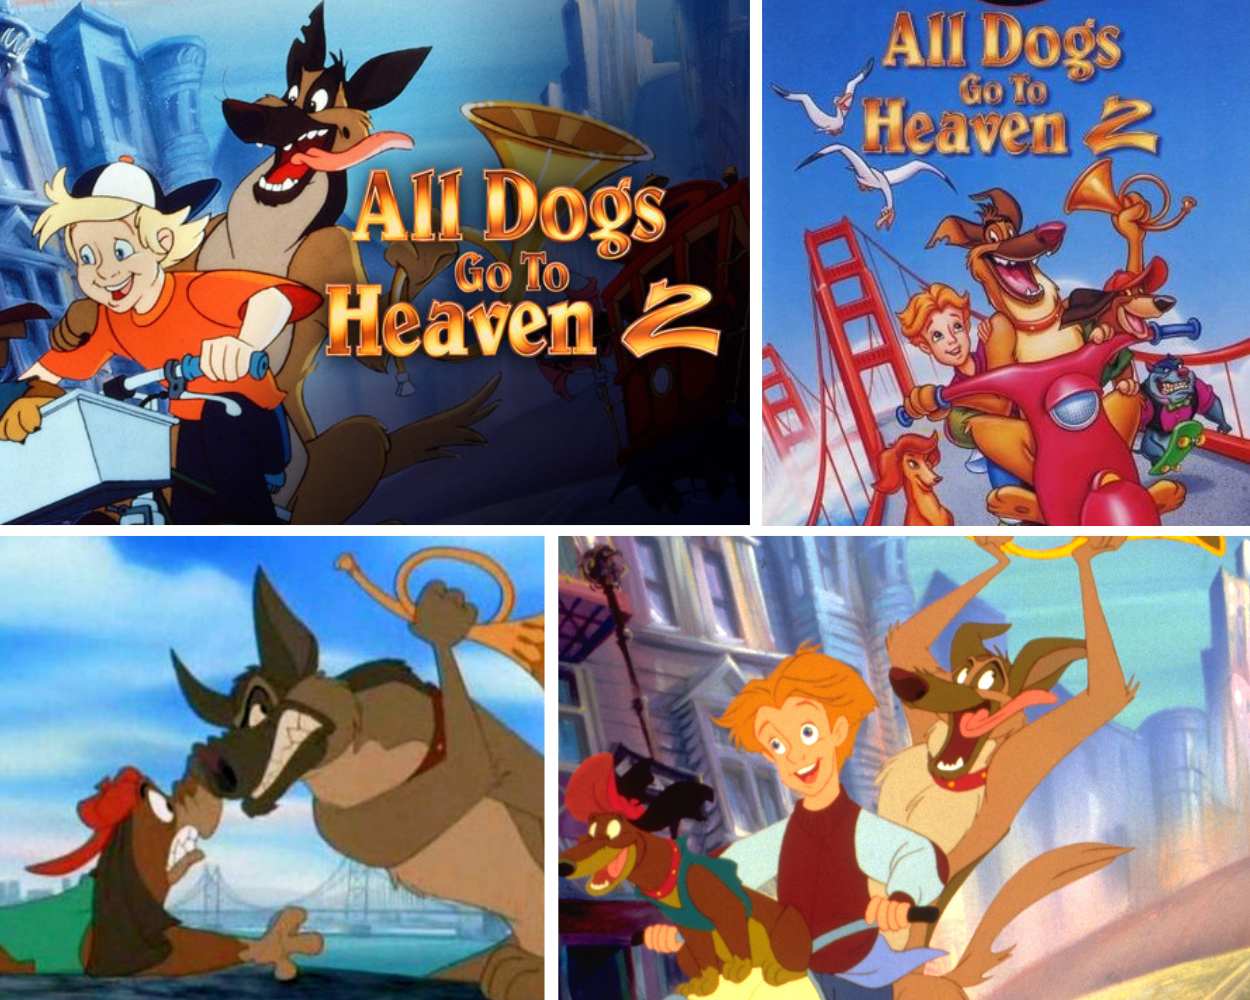 All Dogs Go to Heaven 2 (1996) 